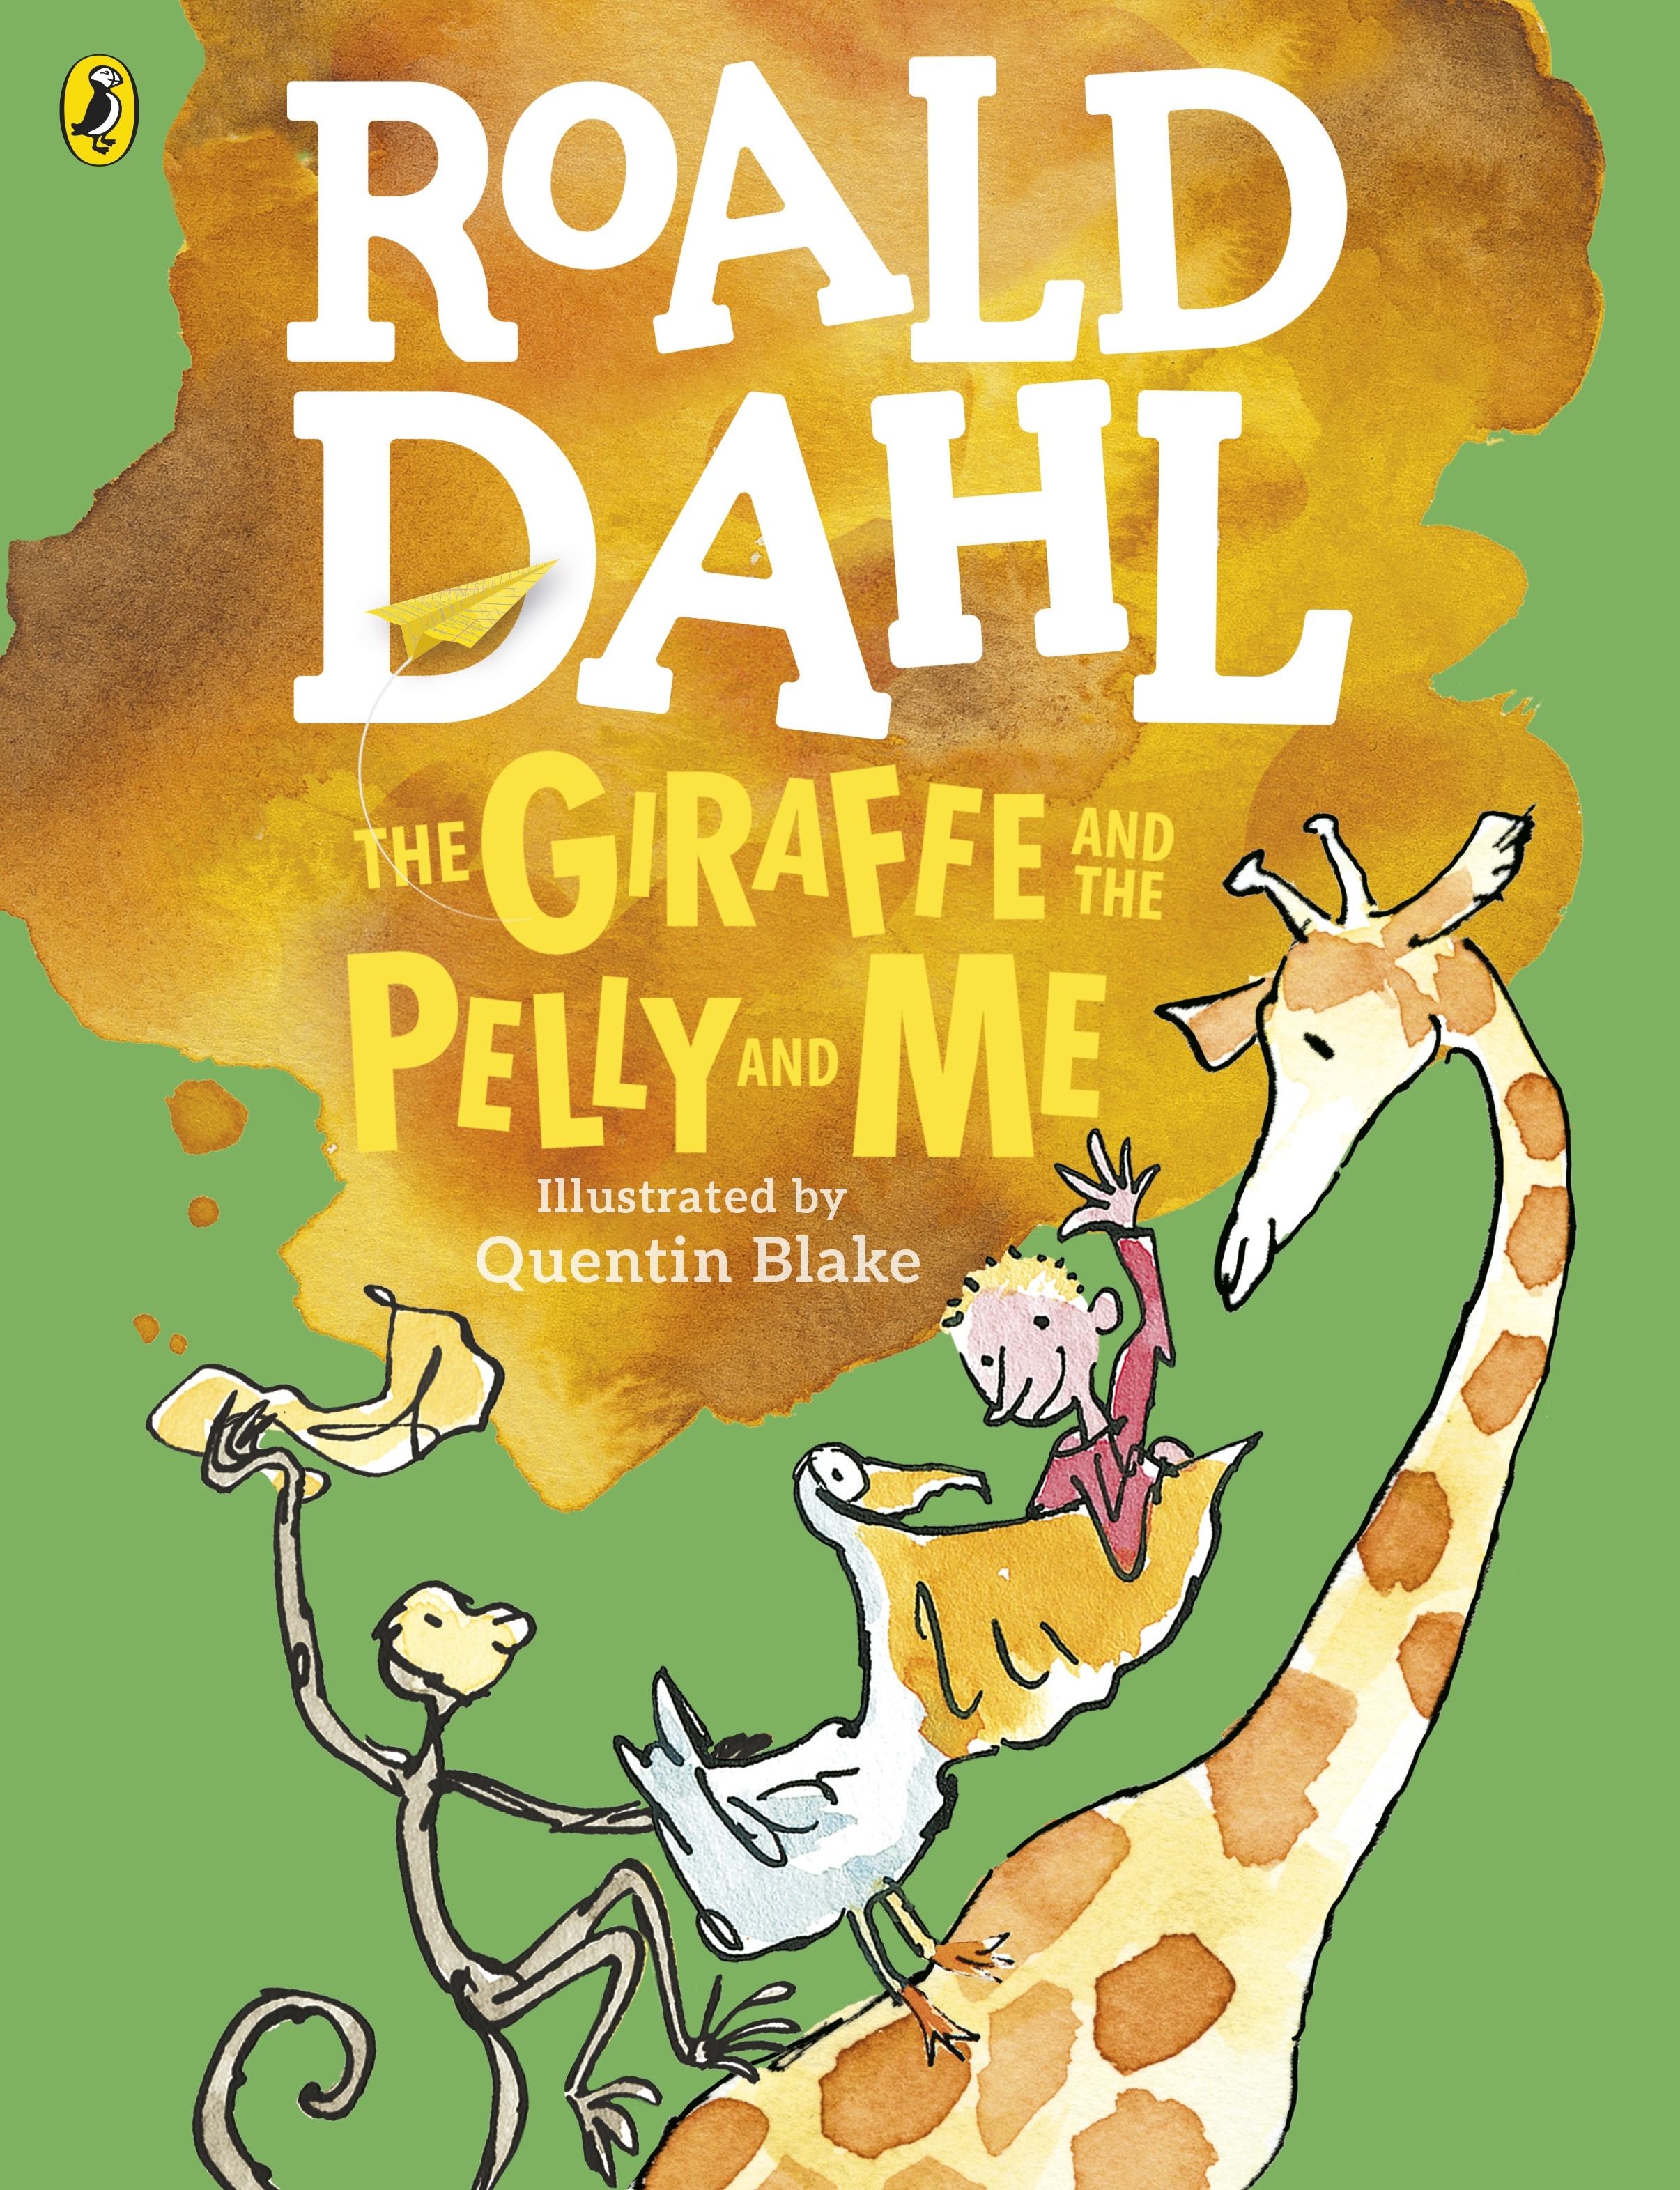 Book “The Giraffe and the Pelly and Me (Colour Edition)” by Roald Dahl — June 2, 2016